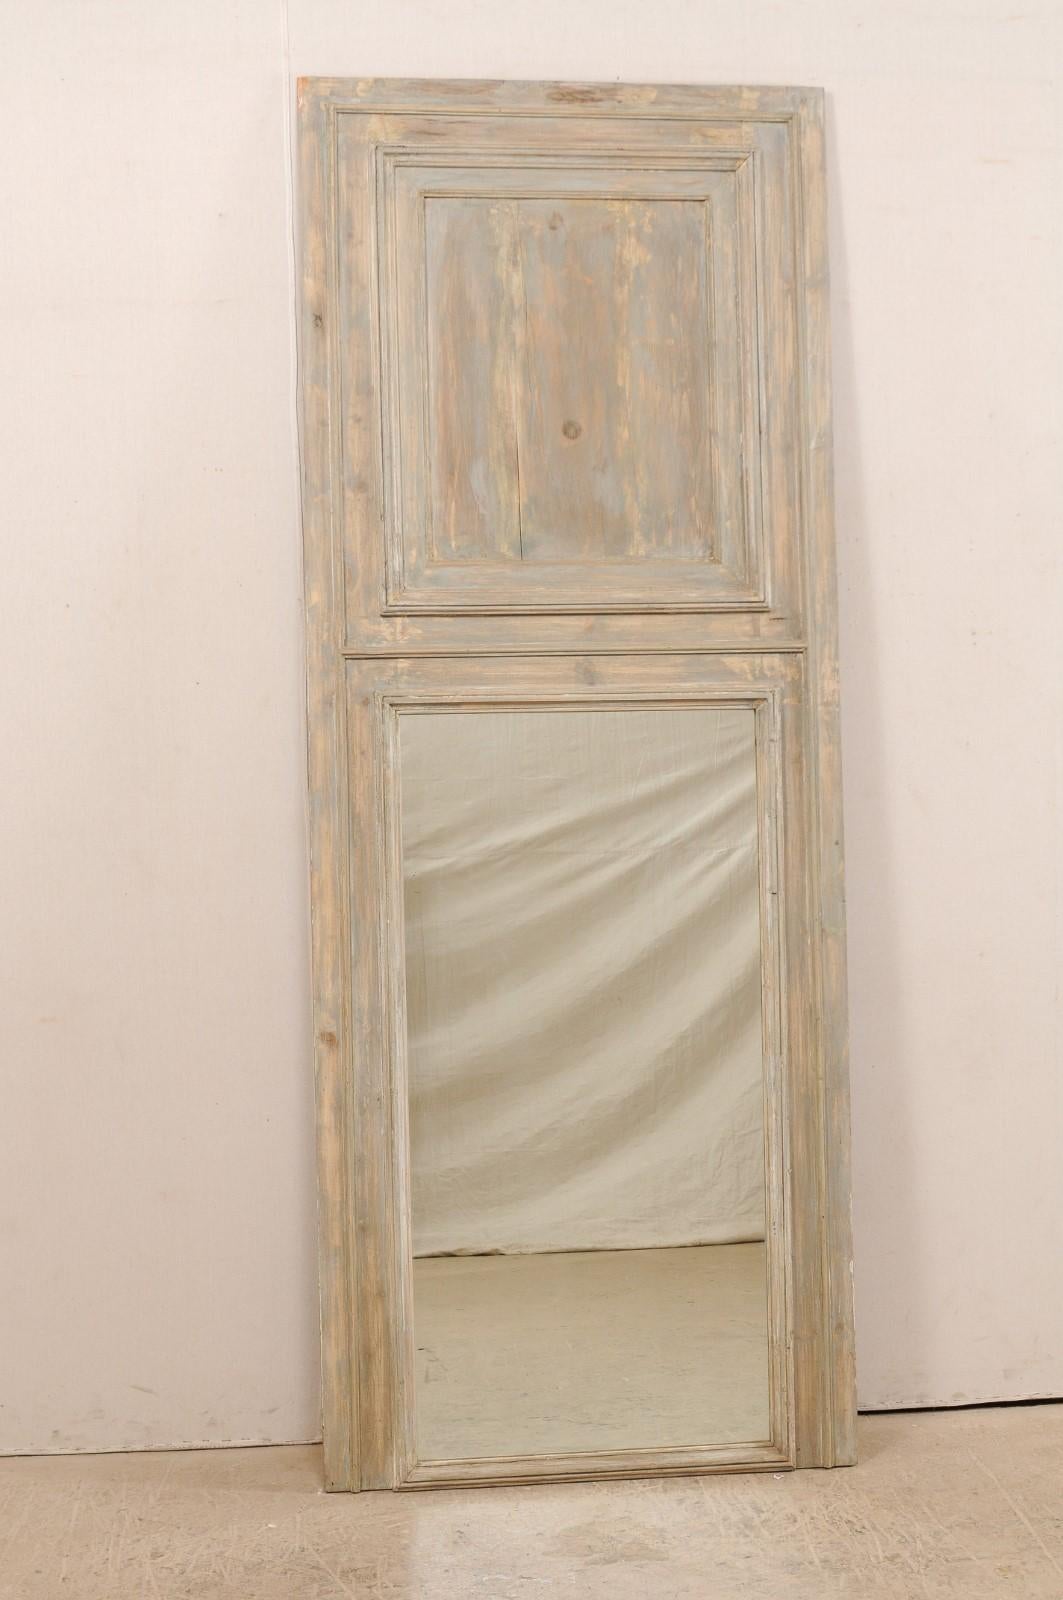 A tall French painted wood trumeau mirror from the 19th century. This antique mirror from France features clean, straight-line molding and trim, with typical trumeau design of wooden plaque-style top over mirror below. It is a nicely sized mirror,